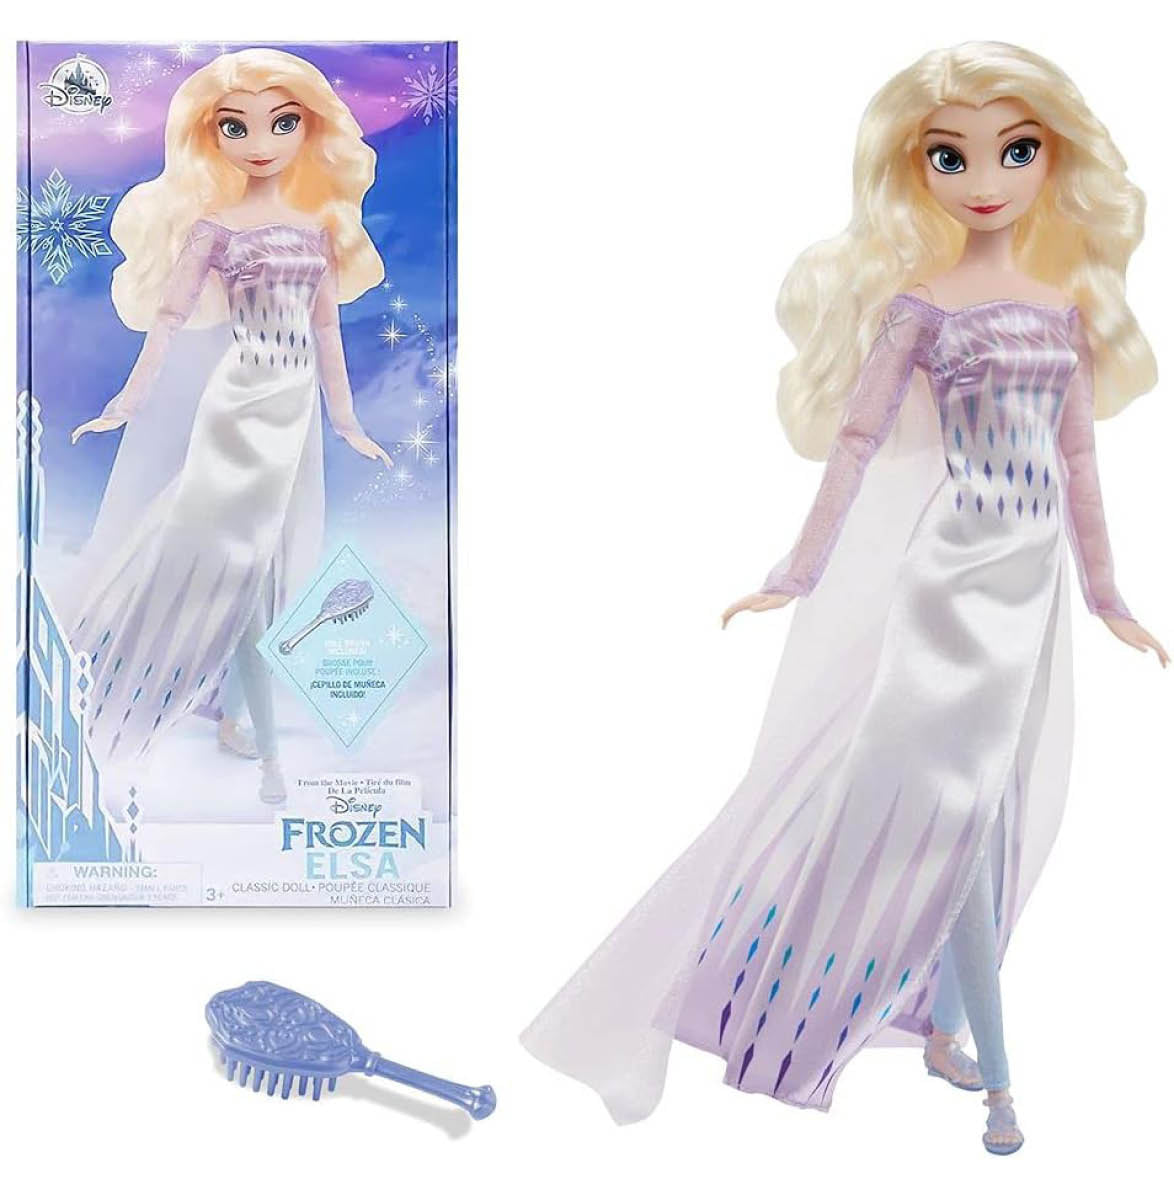 Disney Frozen Elsa Classic Doll and Outer Box